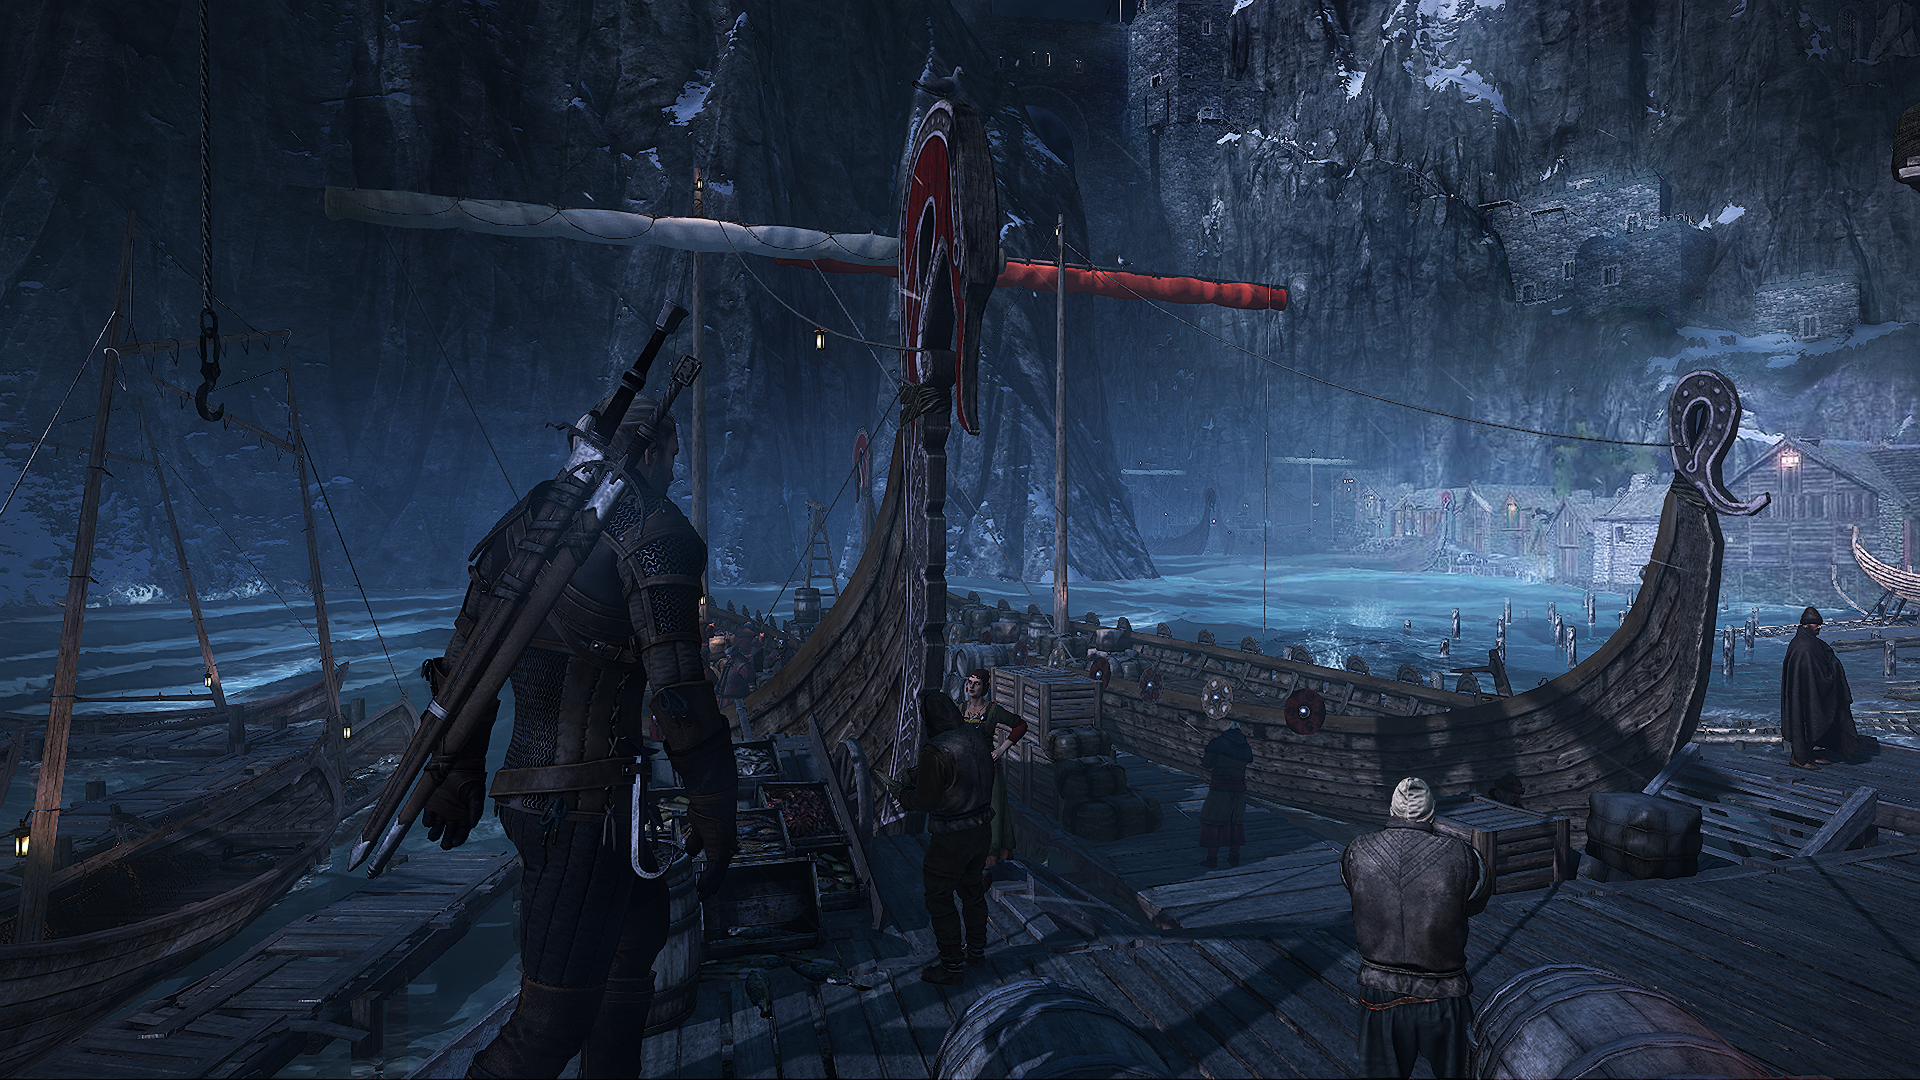 The Witcher 3: Wild Hunt | Docks: More boats. Year of the boat.